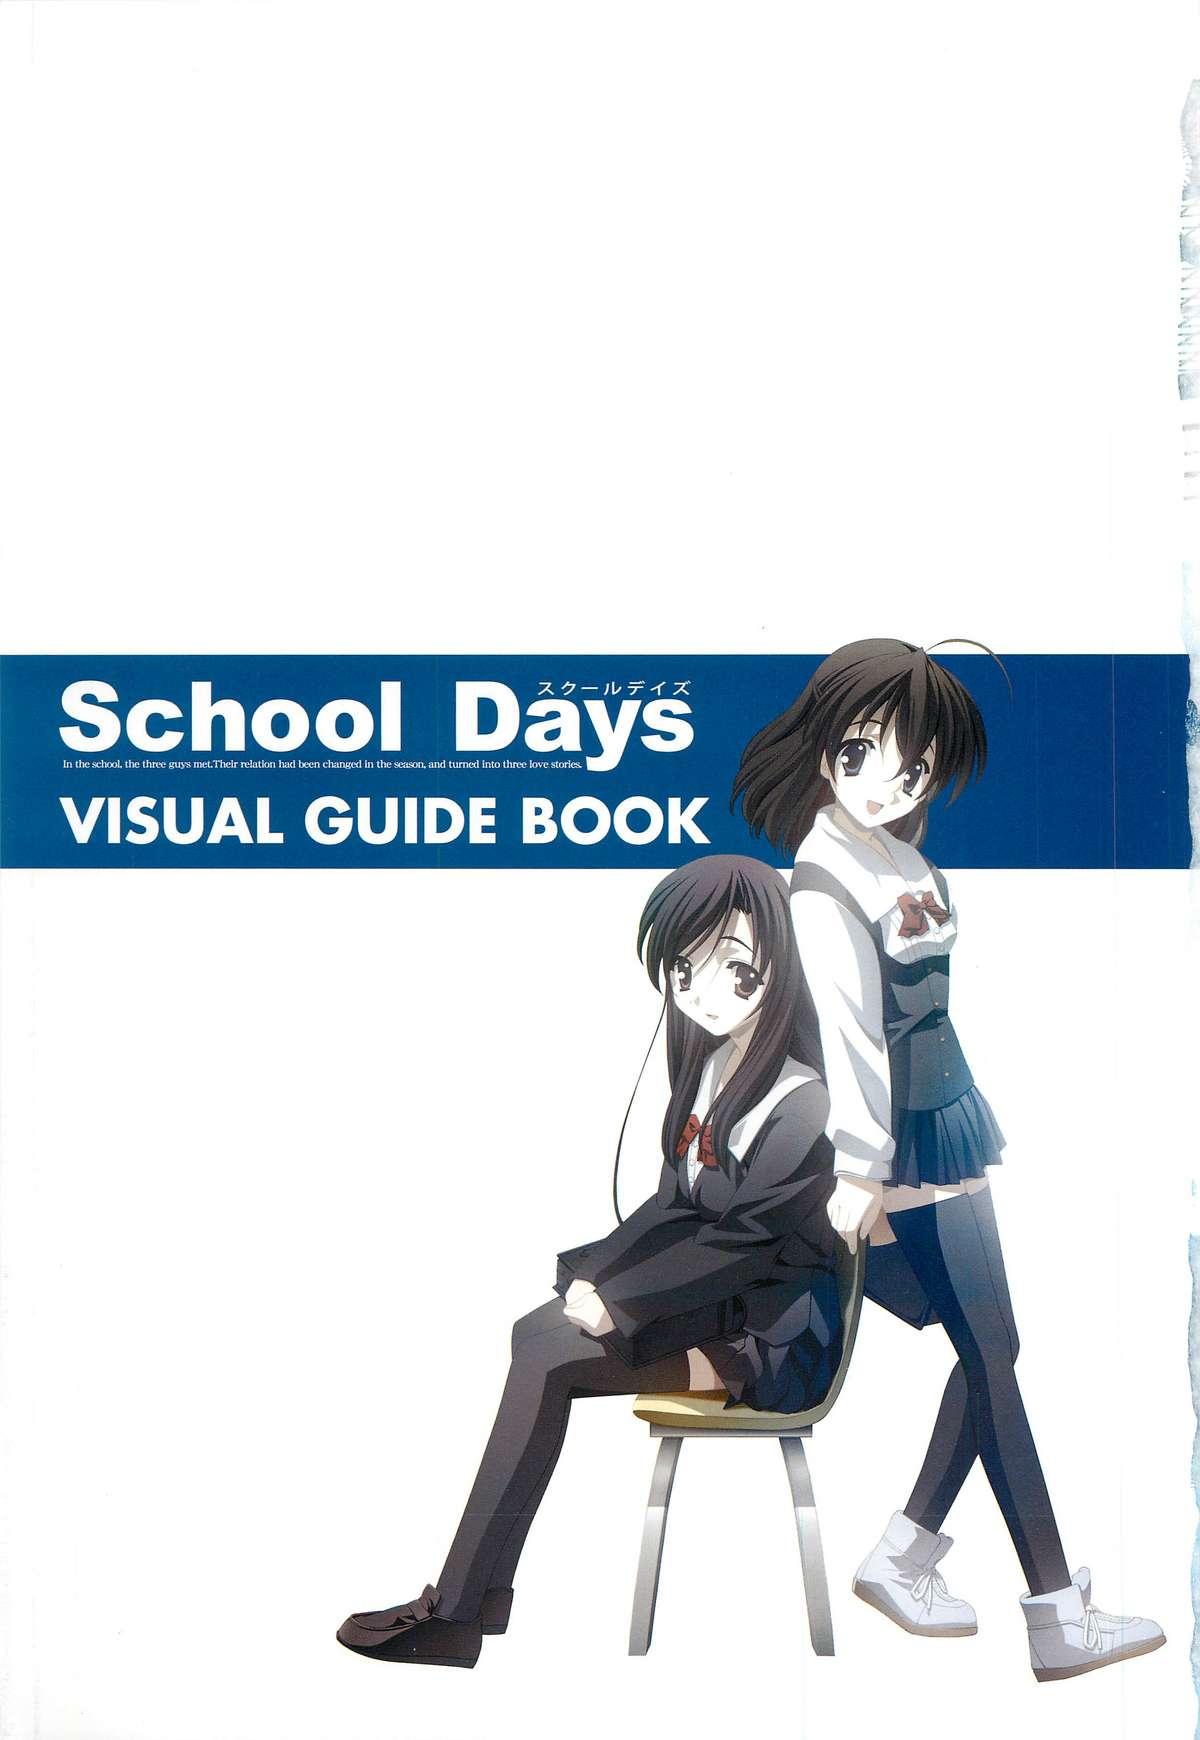 Hard Core Free Porn School Days Visual Guide Book - School days Doggy Style Porn - Page 3